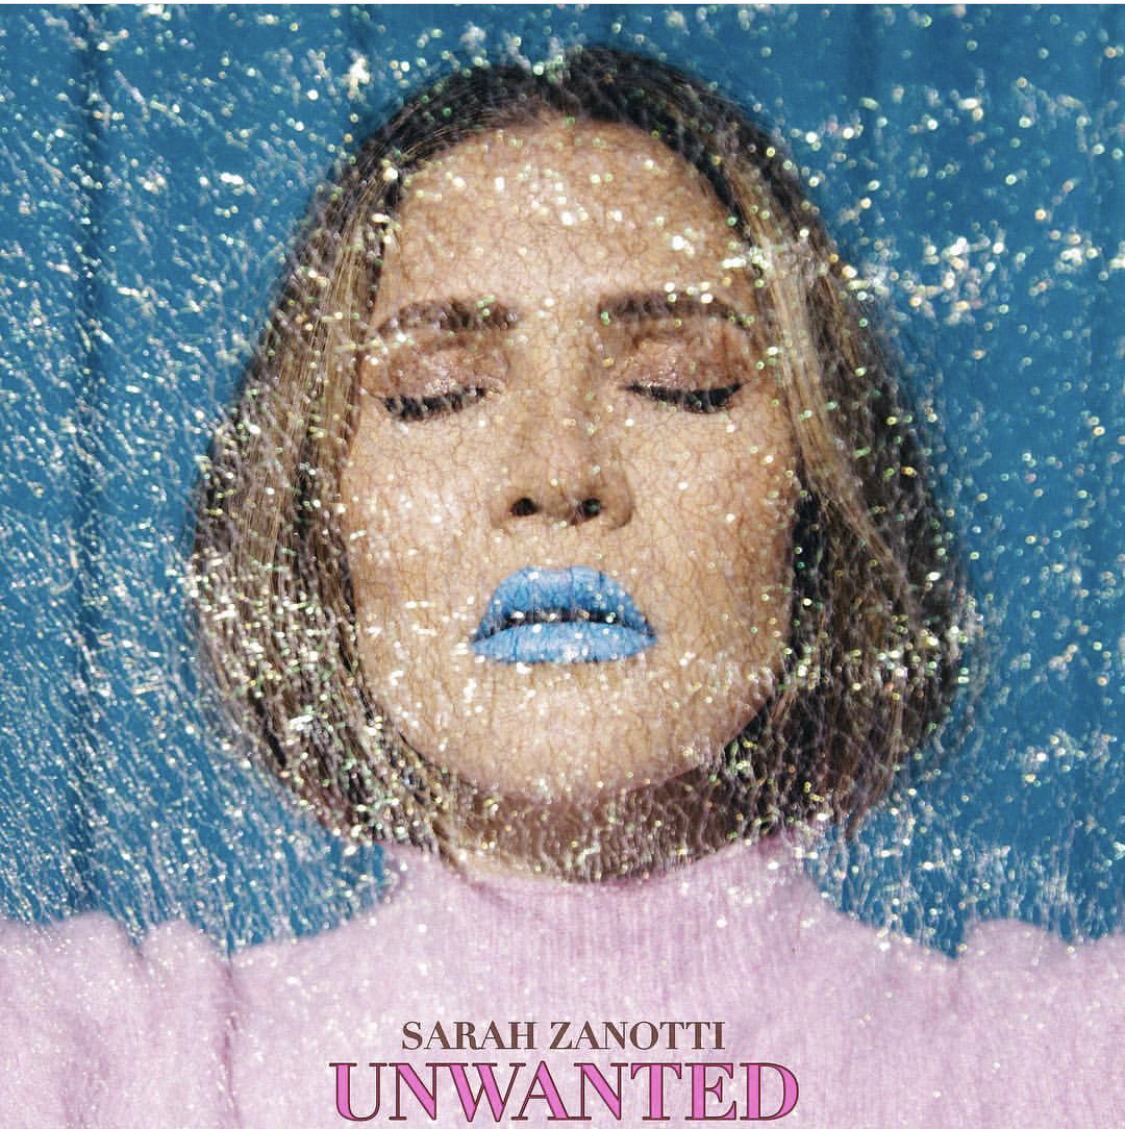 Sarah's new song Unwanted is out!!